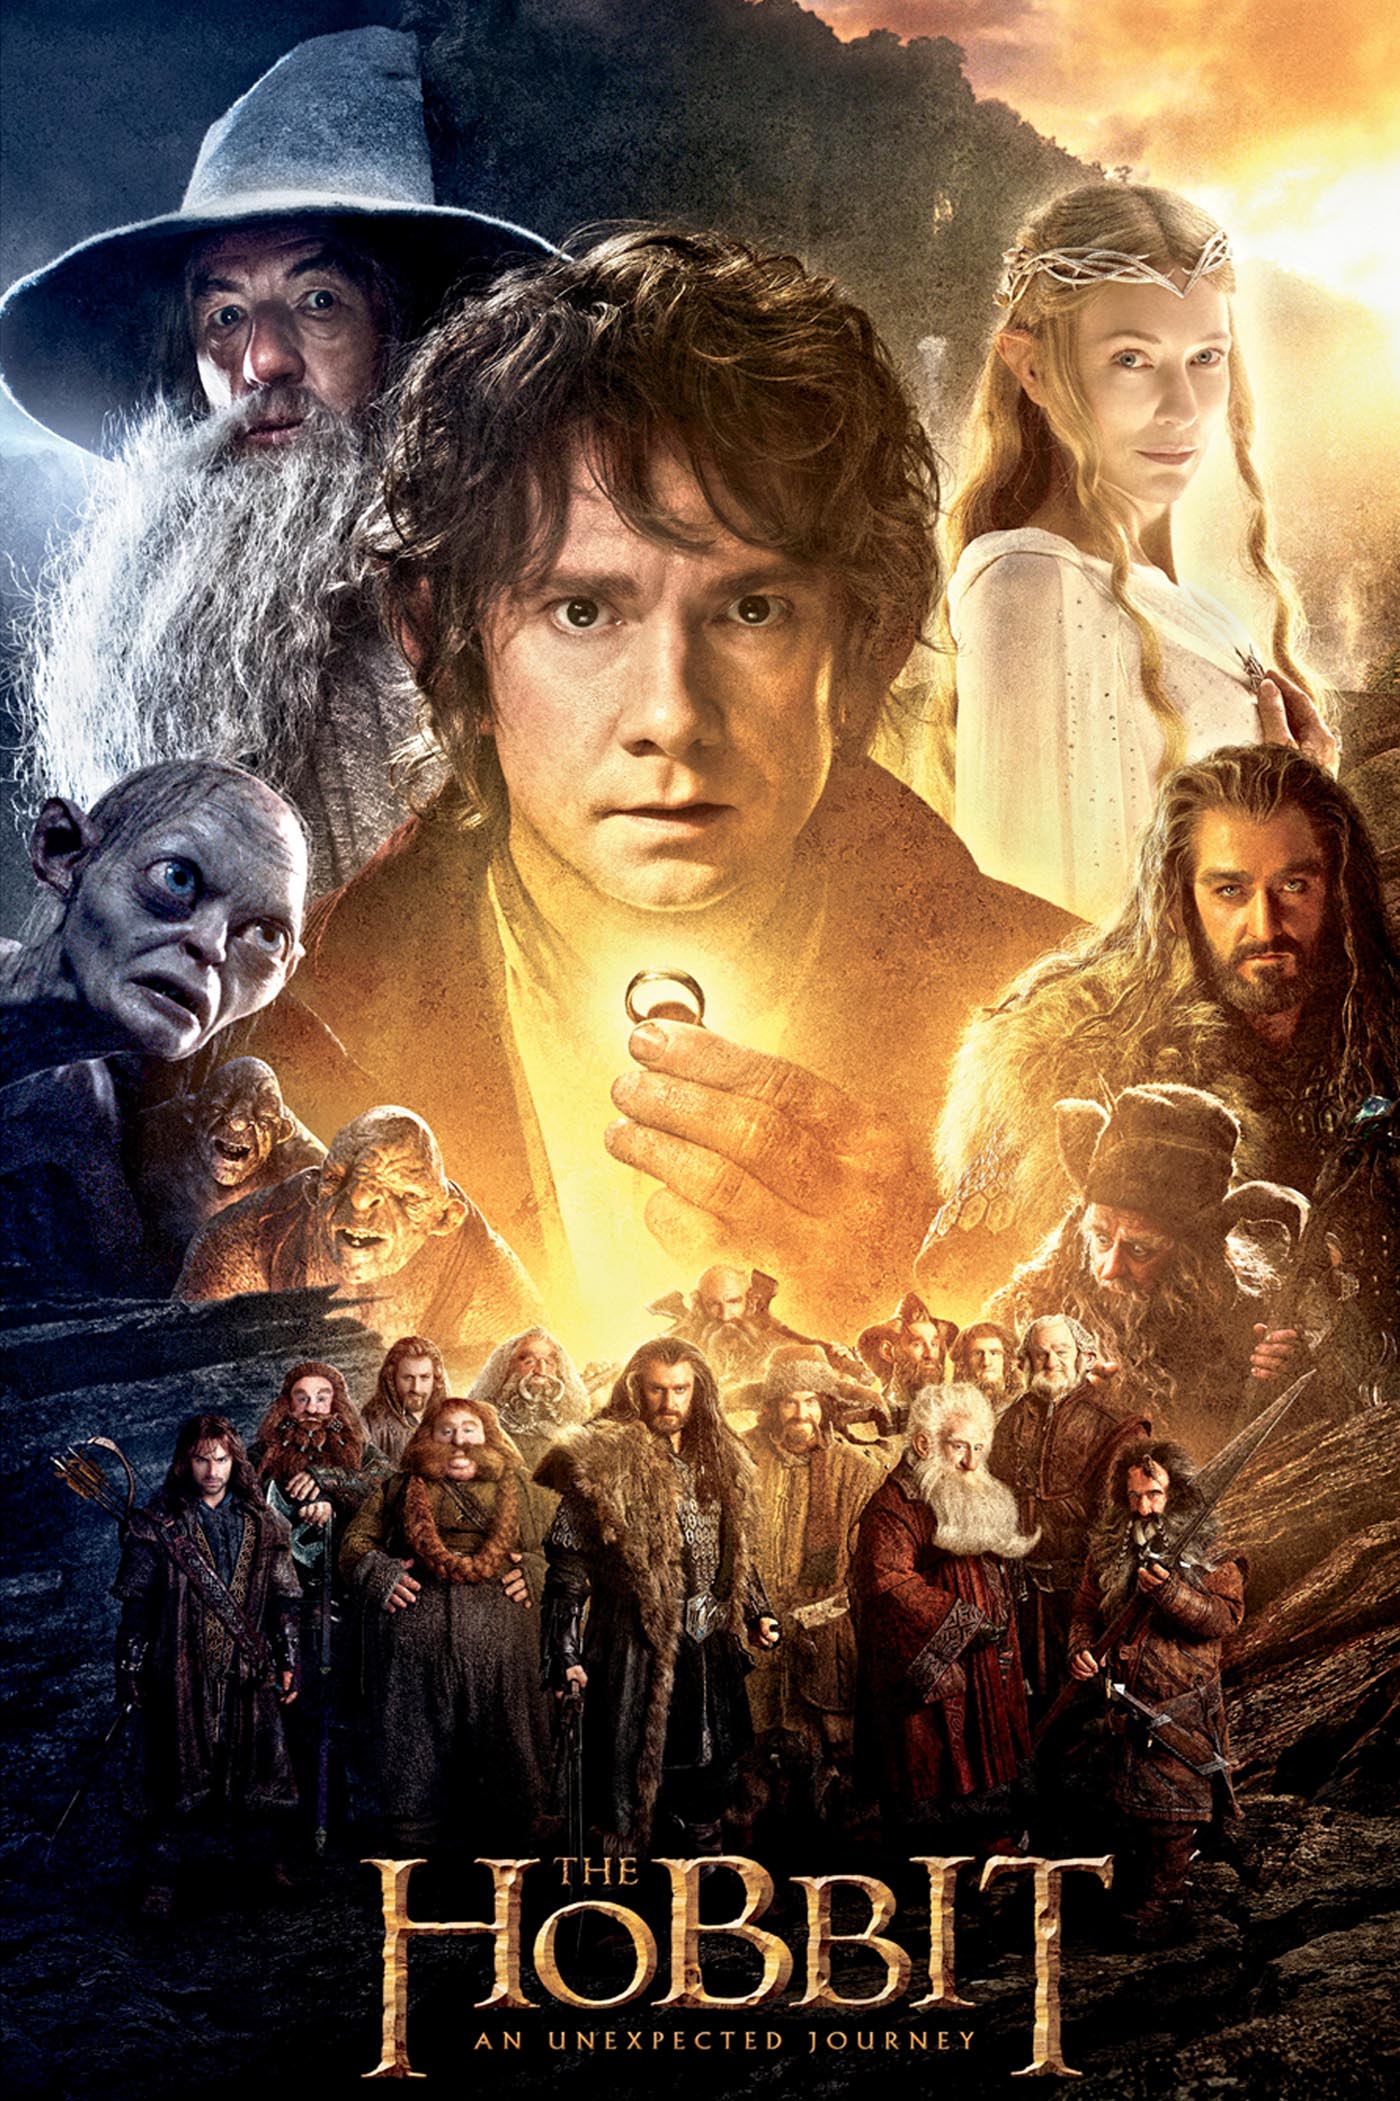 The Hobbit: An Unexpected Journey free download